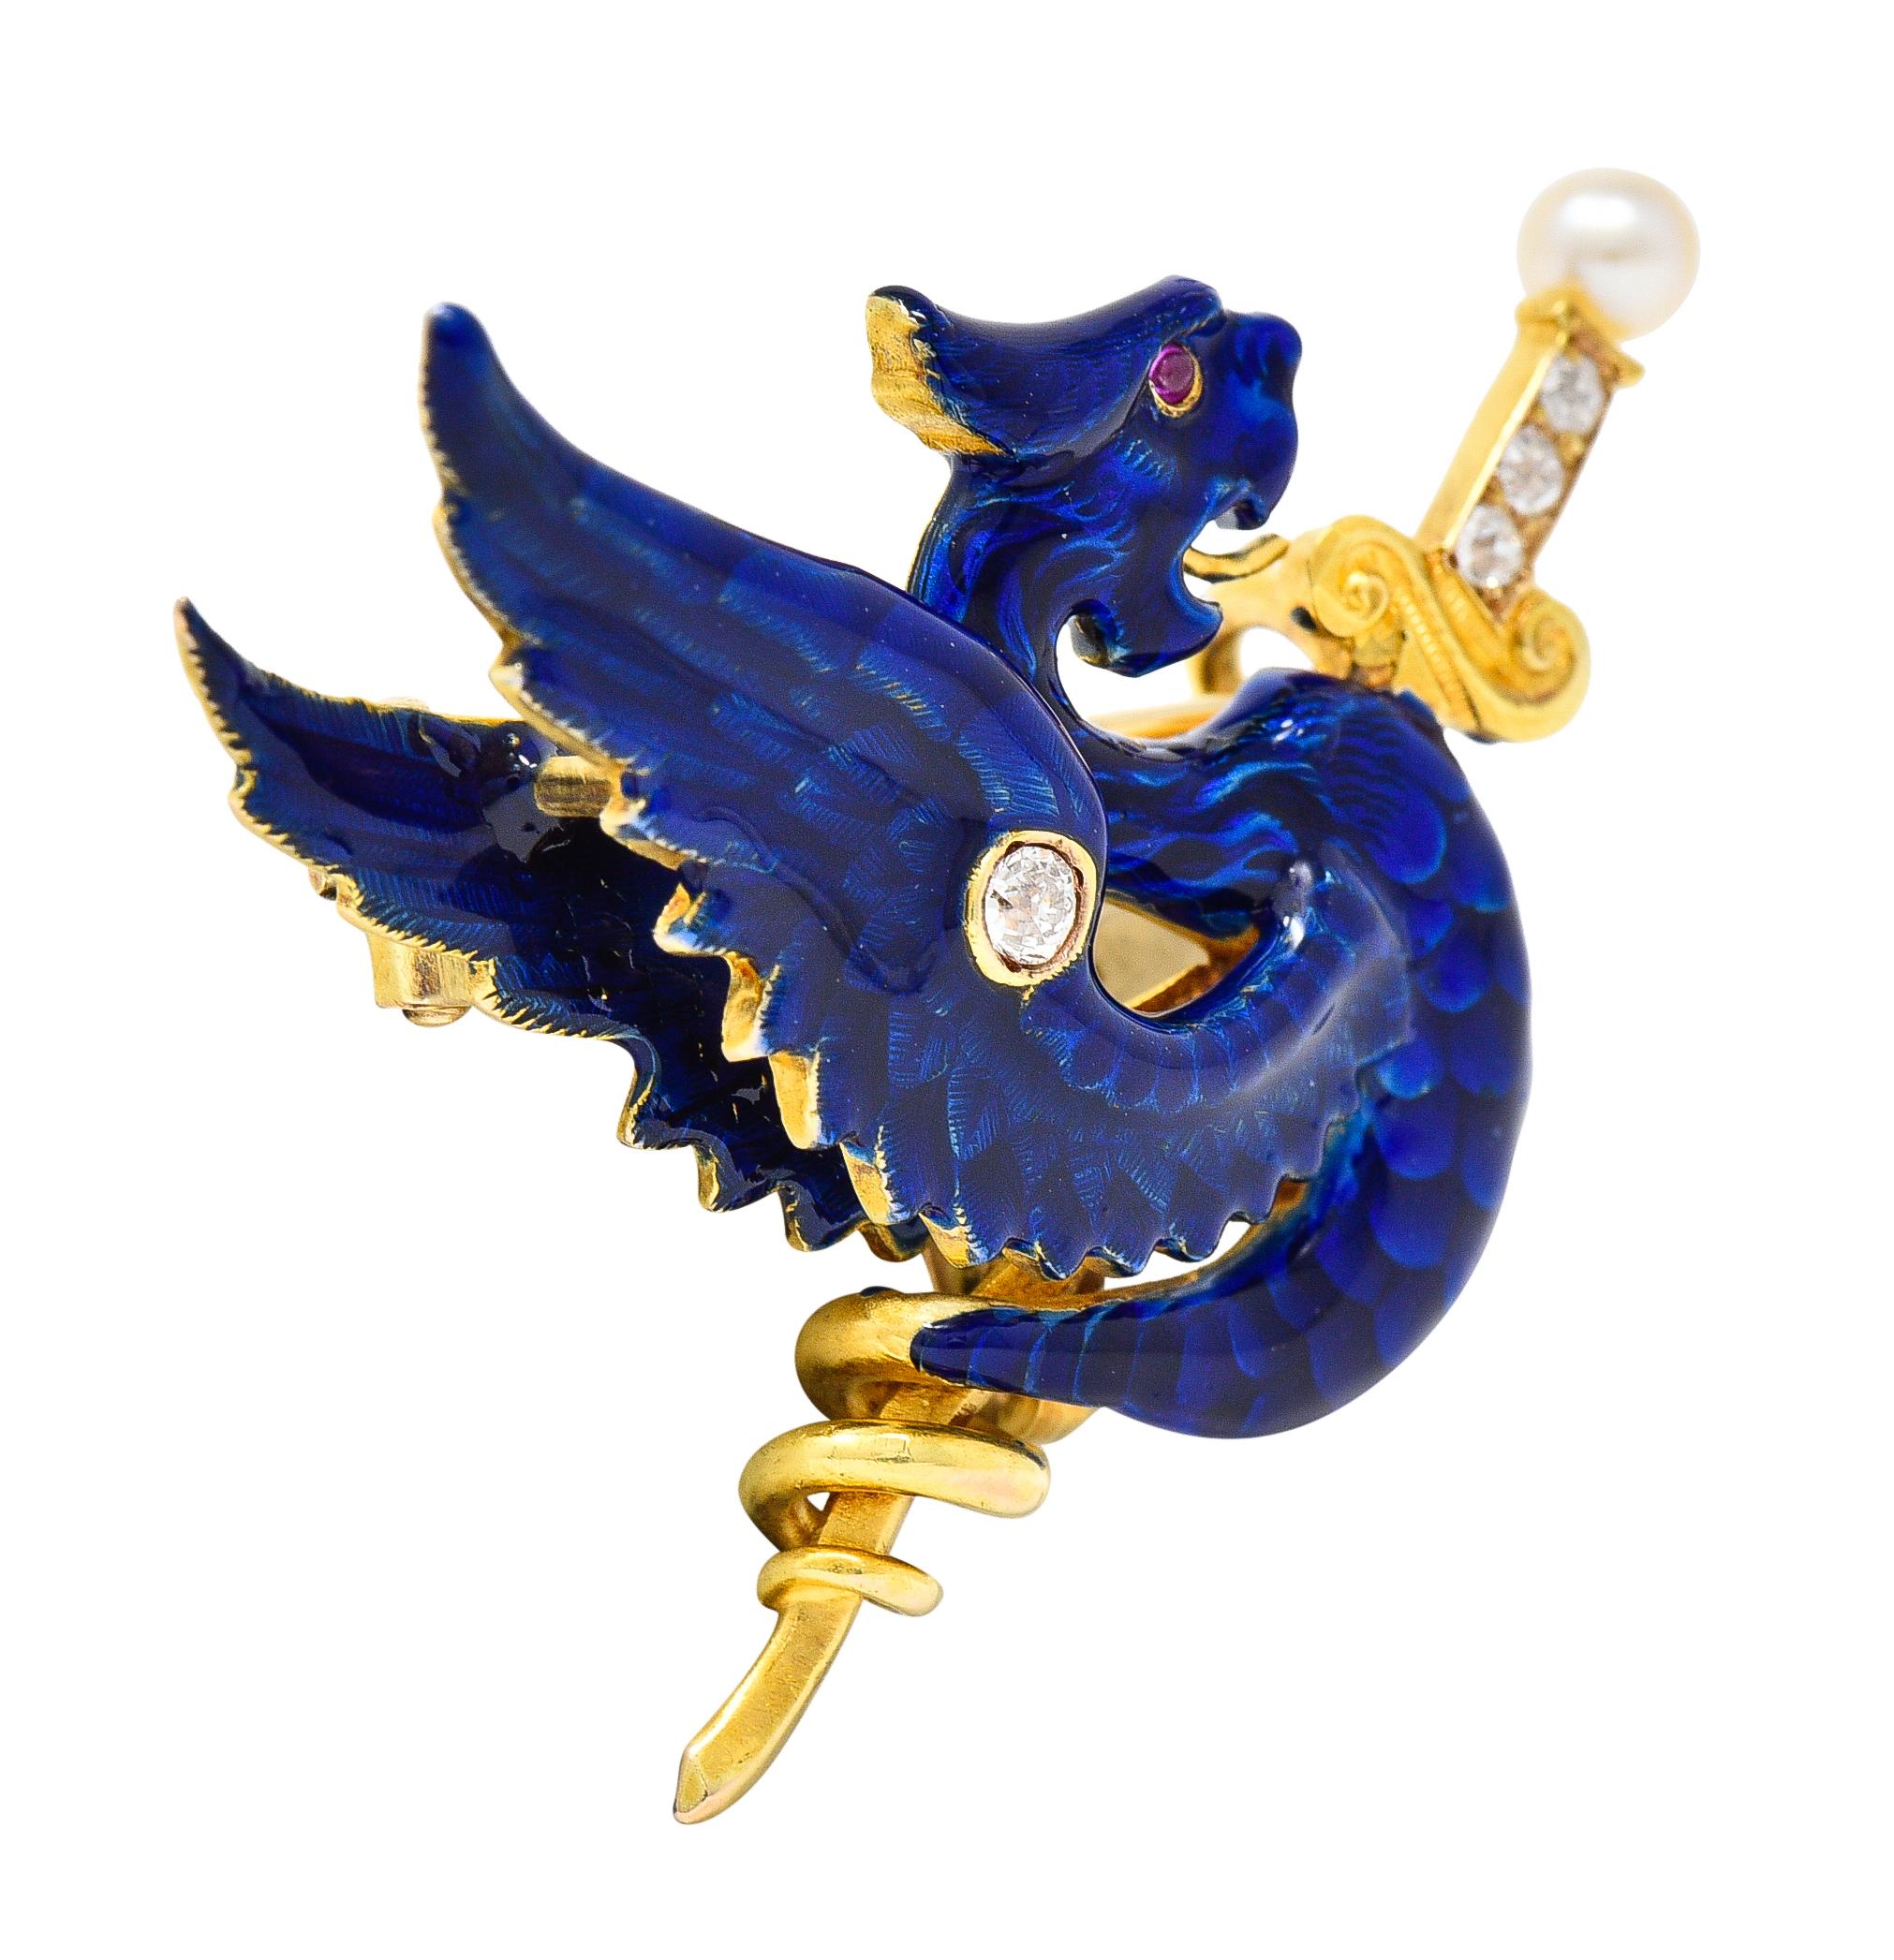 Designed as a winged wyvern serpent coiled around a sword with fanning wings
Featuring basse-taille enamel glossed over engraved feathers and scales
Glossy transparent royal blue in color - exhibiting minimal loss
Sword hilt and wing are accented by